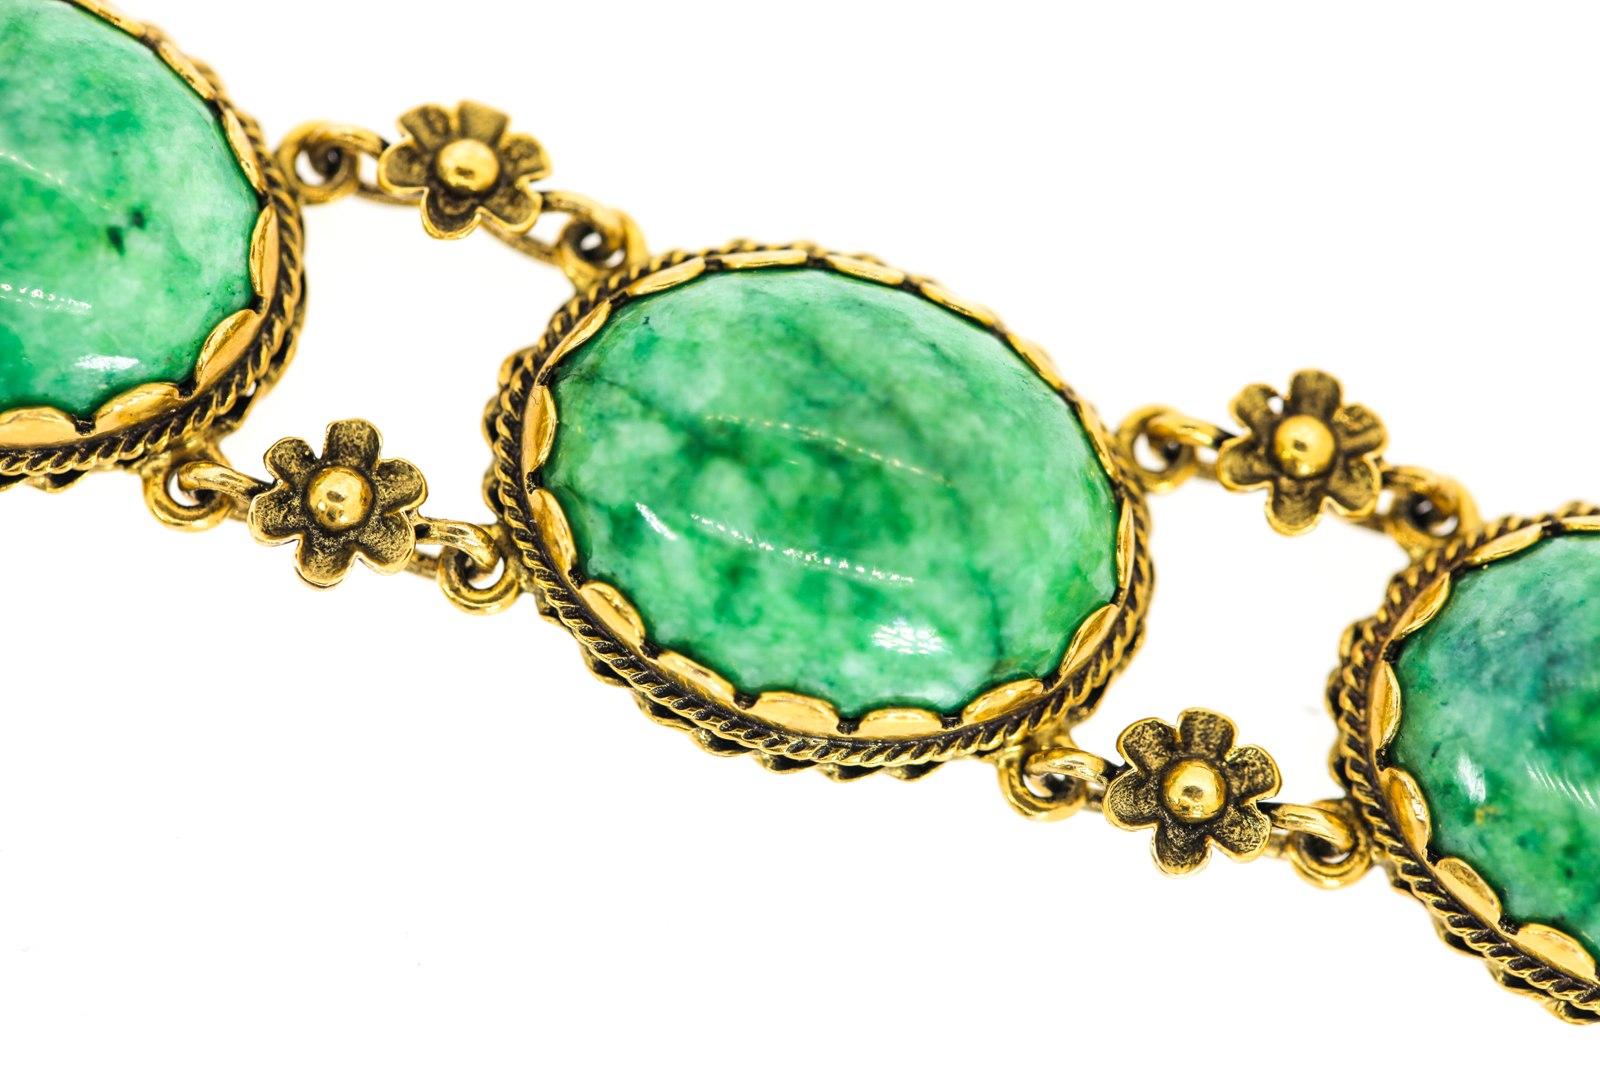 A special hand assembled bracelet features six oval cabochon natural green Jade average size stones.  Each Jade is set in a 14KT yellow gold scalloped bazel frame, accented with two different twisted ropes and joined by two gold flowers.  The 7.5